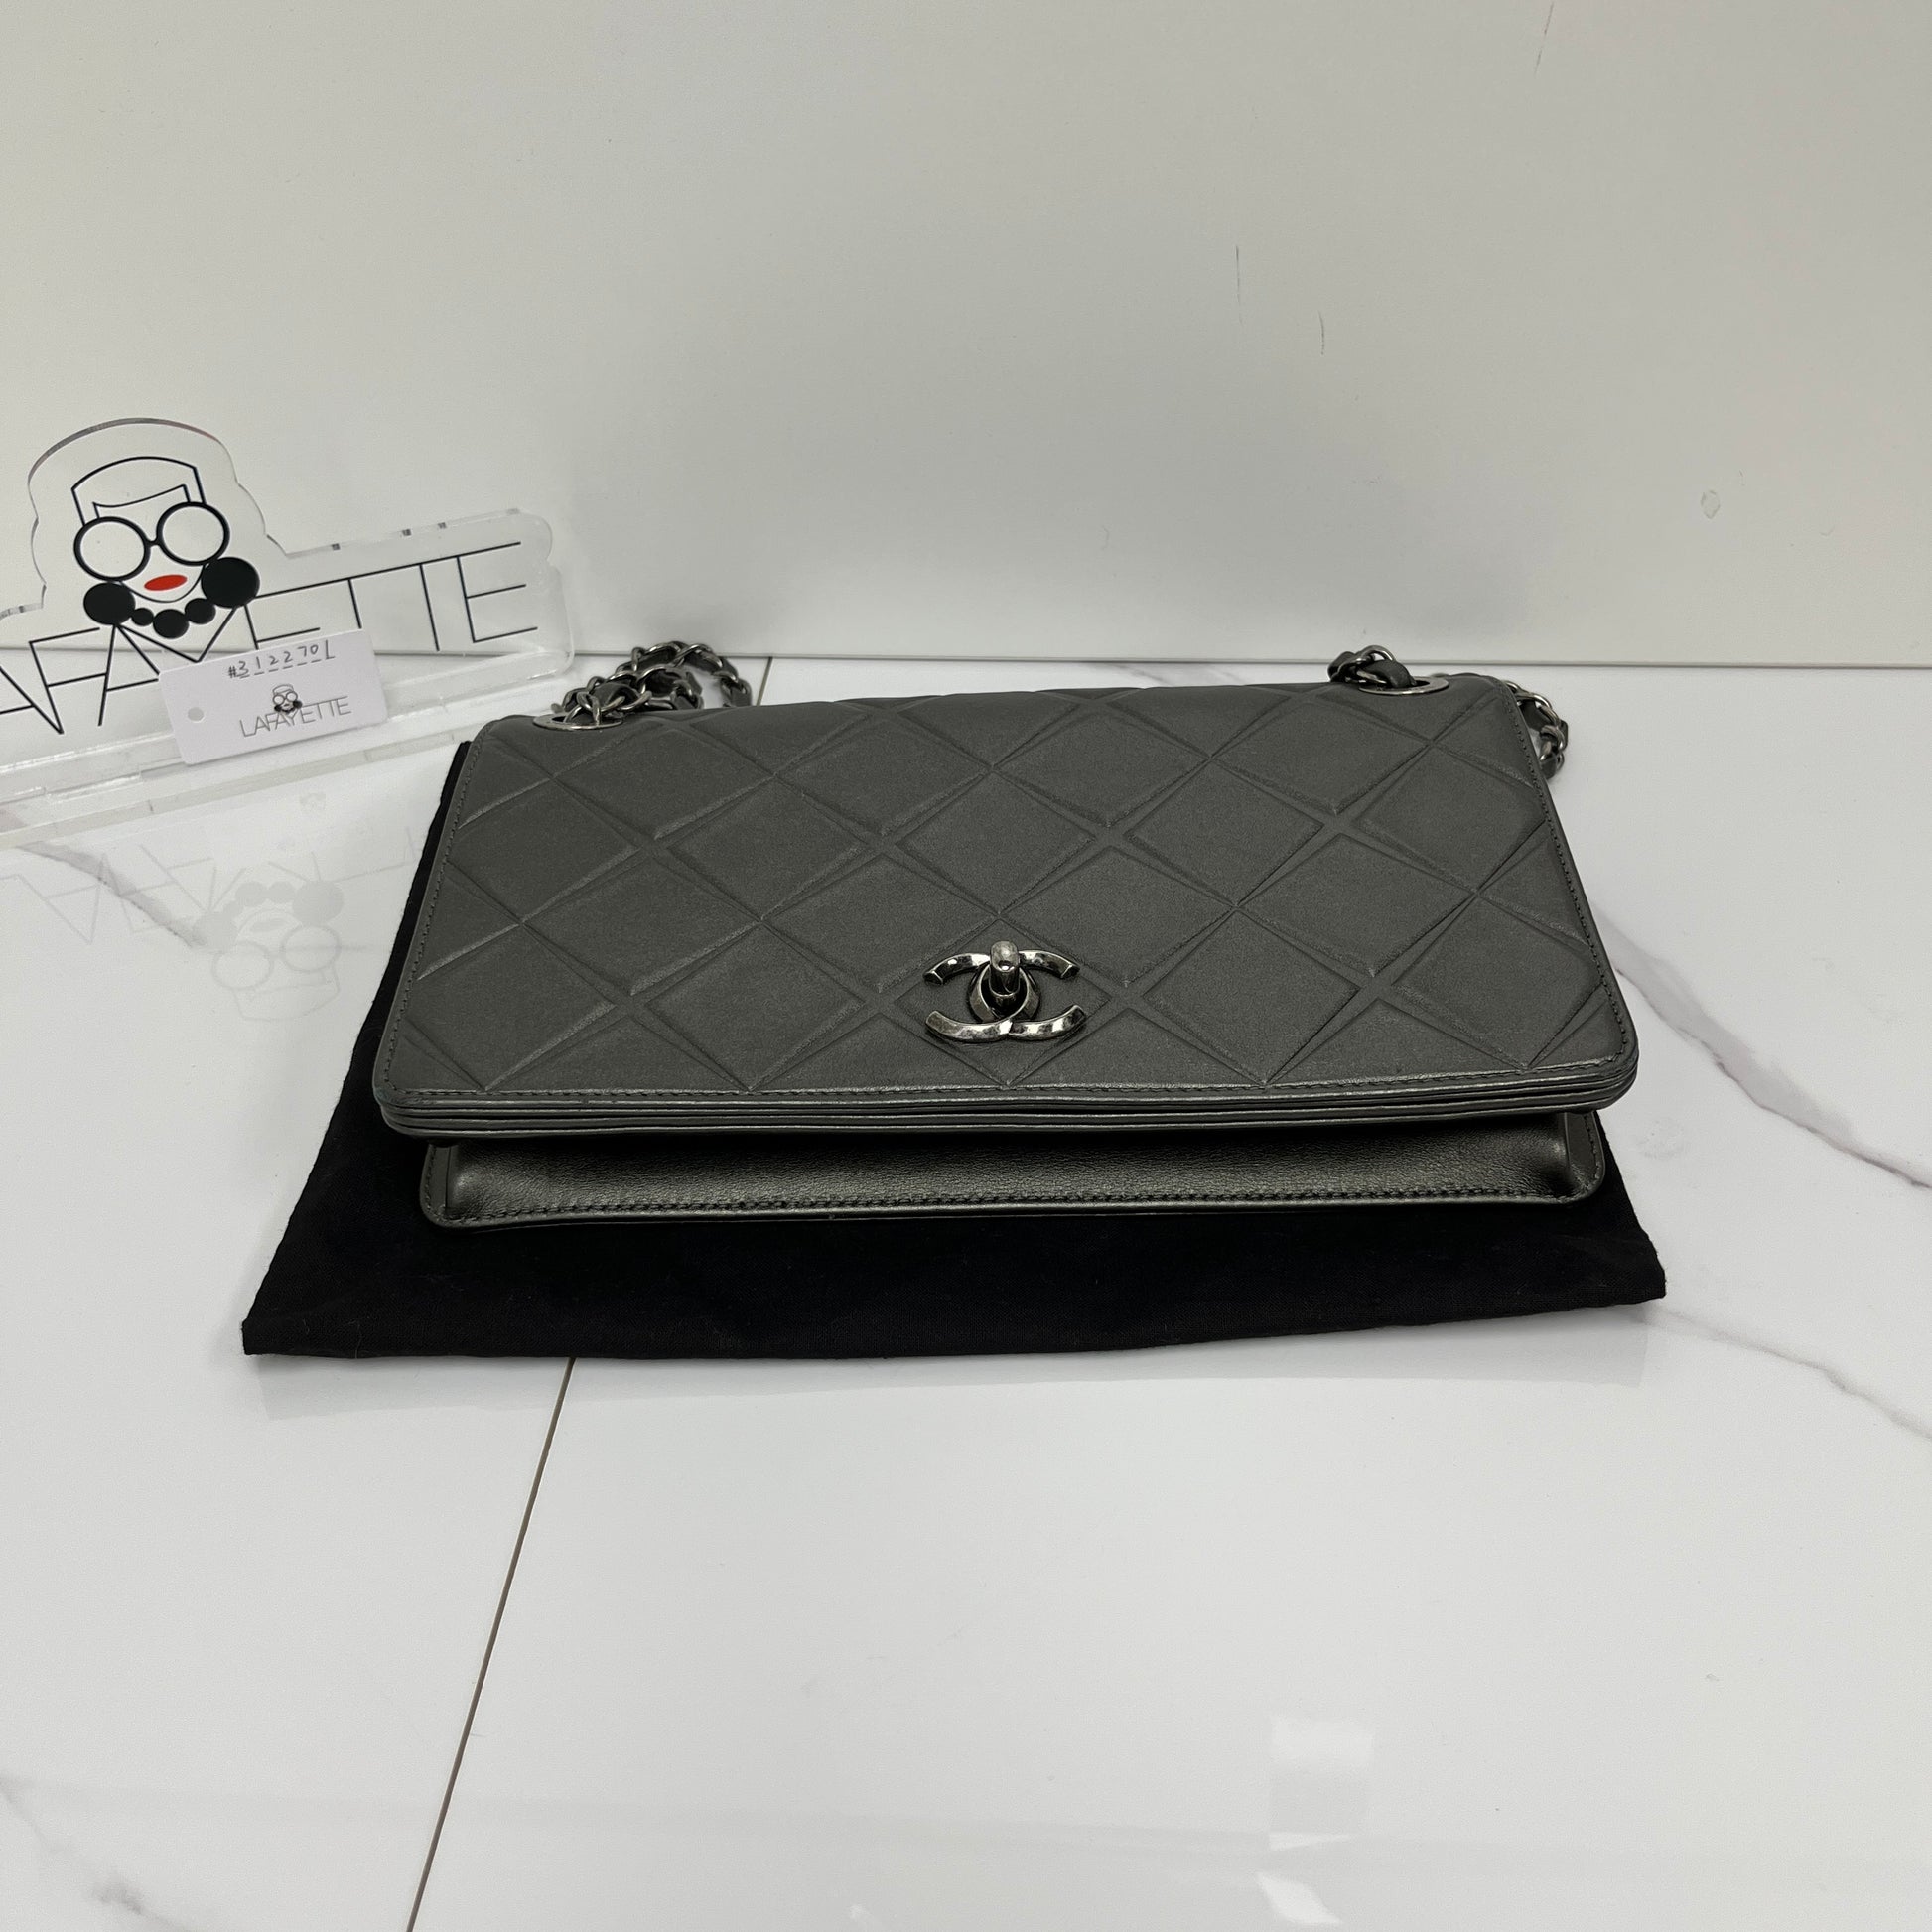 Chanel Flap Bag With 4 Grommets - Lafayette Consignment